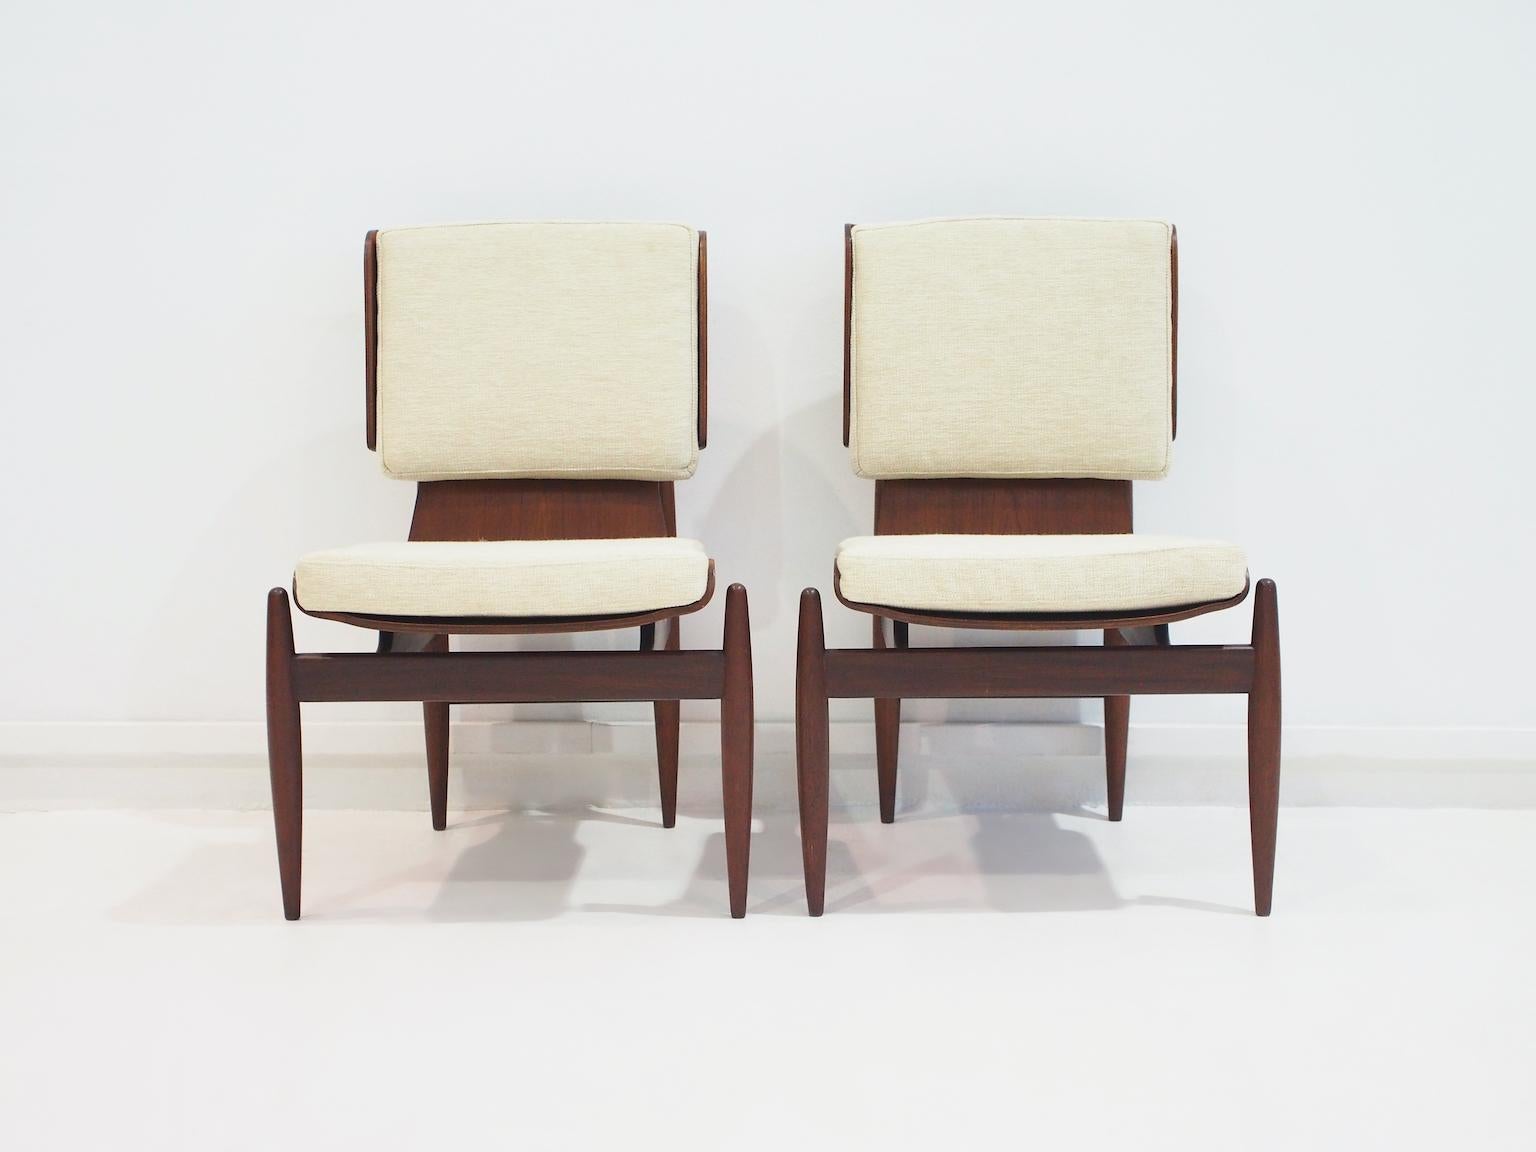 Pair of beautifully crafted side chairs by Barovero from the '50s. The chairs feature a curved plywood shell structure that seems to 'float' on top of the frame and the tapered legs. The padded cushions of the seat and back are covered in beige